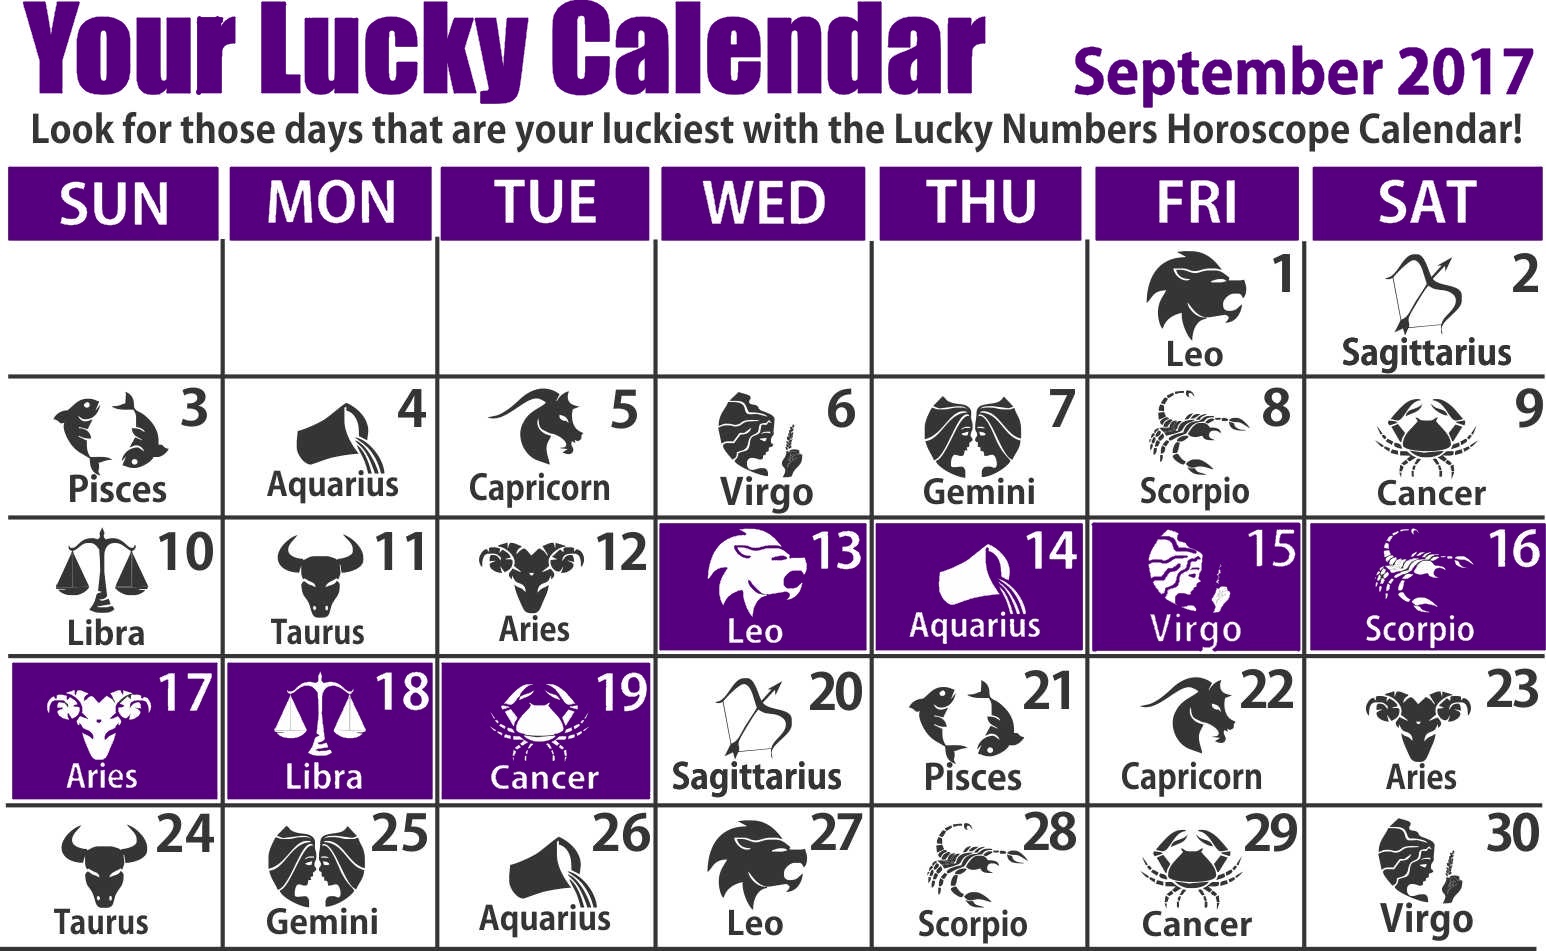 What day of the week is lucky for Sagittarius?